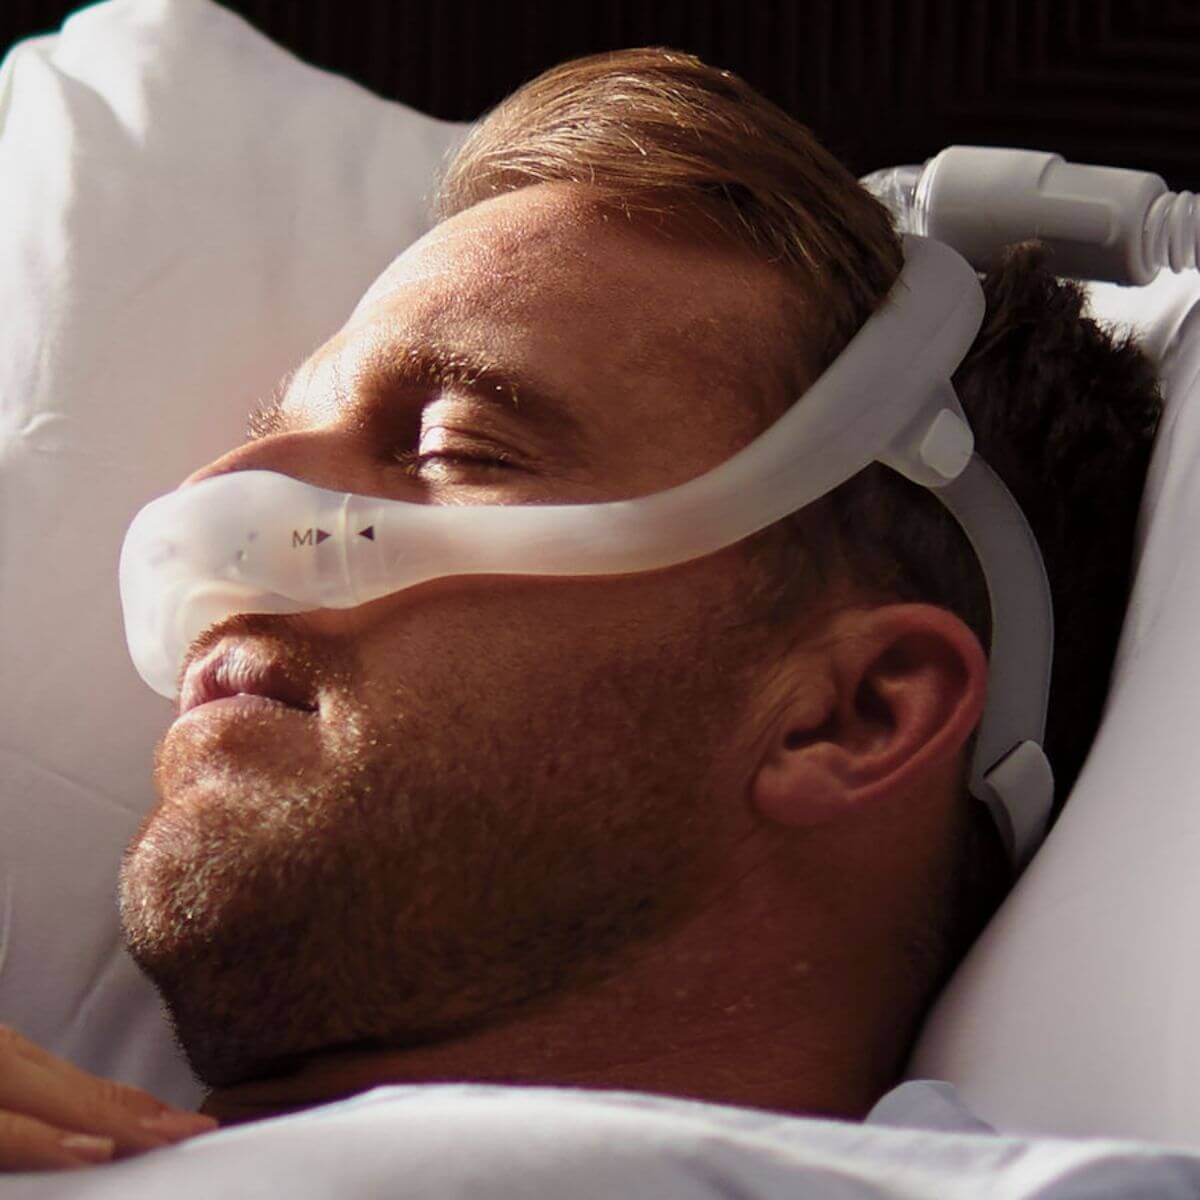 https://www.cpapman.com/images/Philips-Respironics/Philips-DreamWear-Nasal-CPAP-Mask-with-updated-headgear.jpg